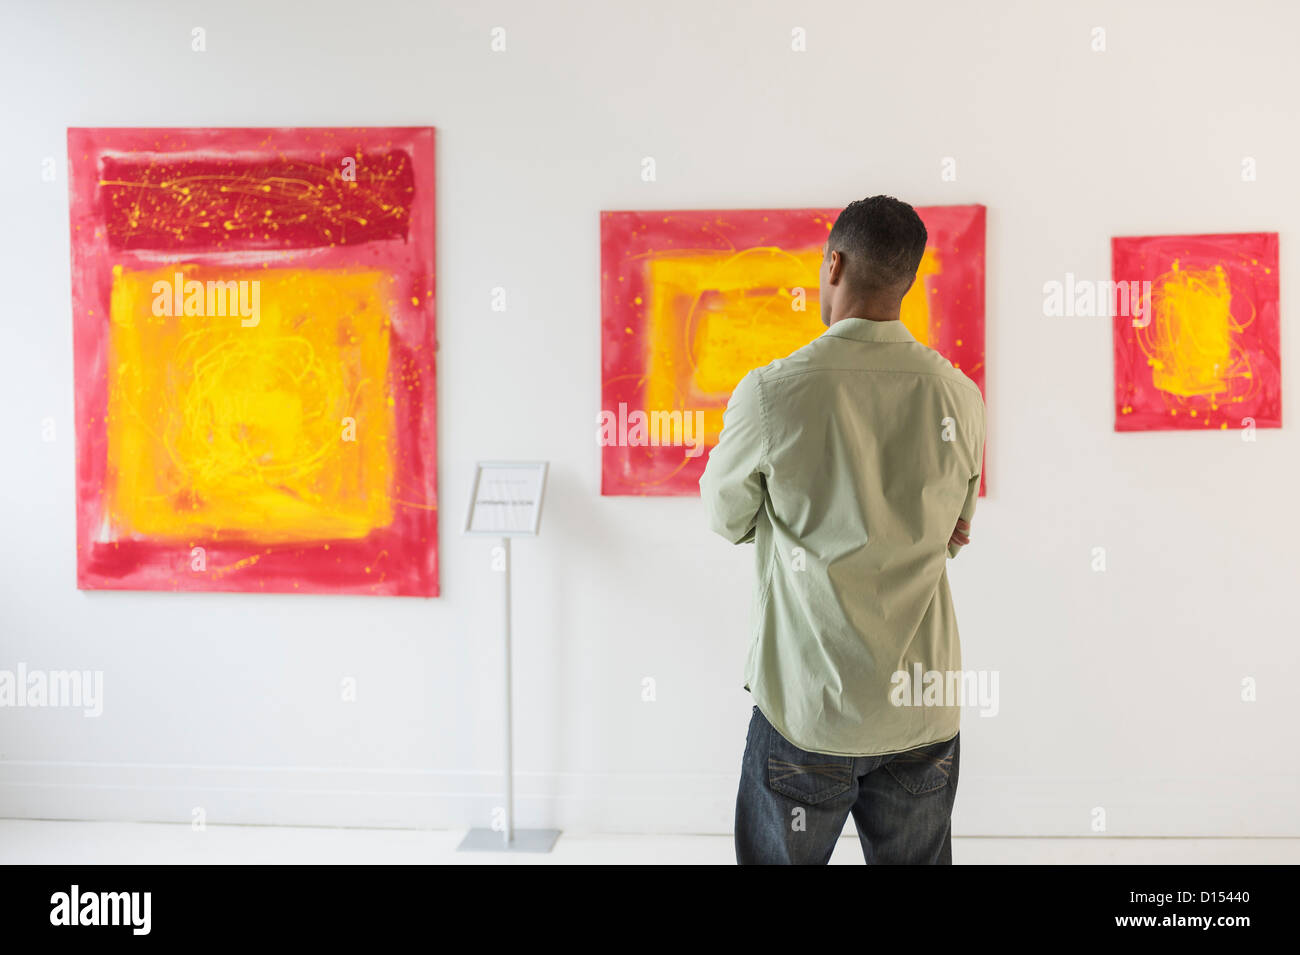 USA, New Jersey, Jersey City, Man watching paintings in modern art gallery Stock Photo